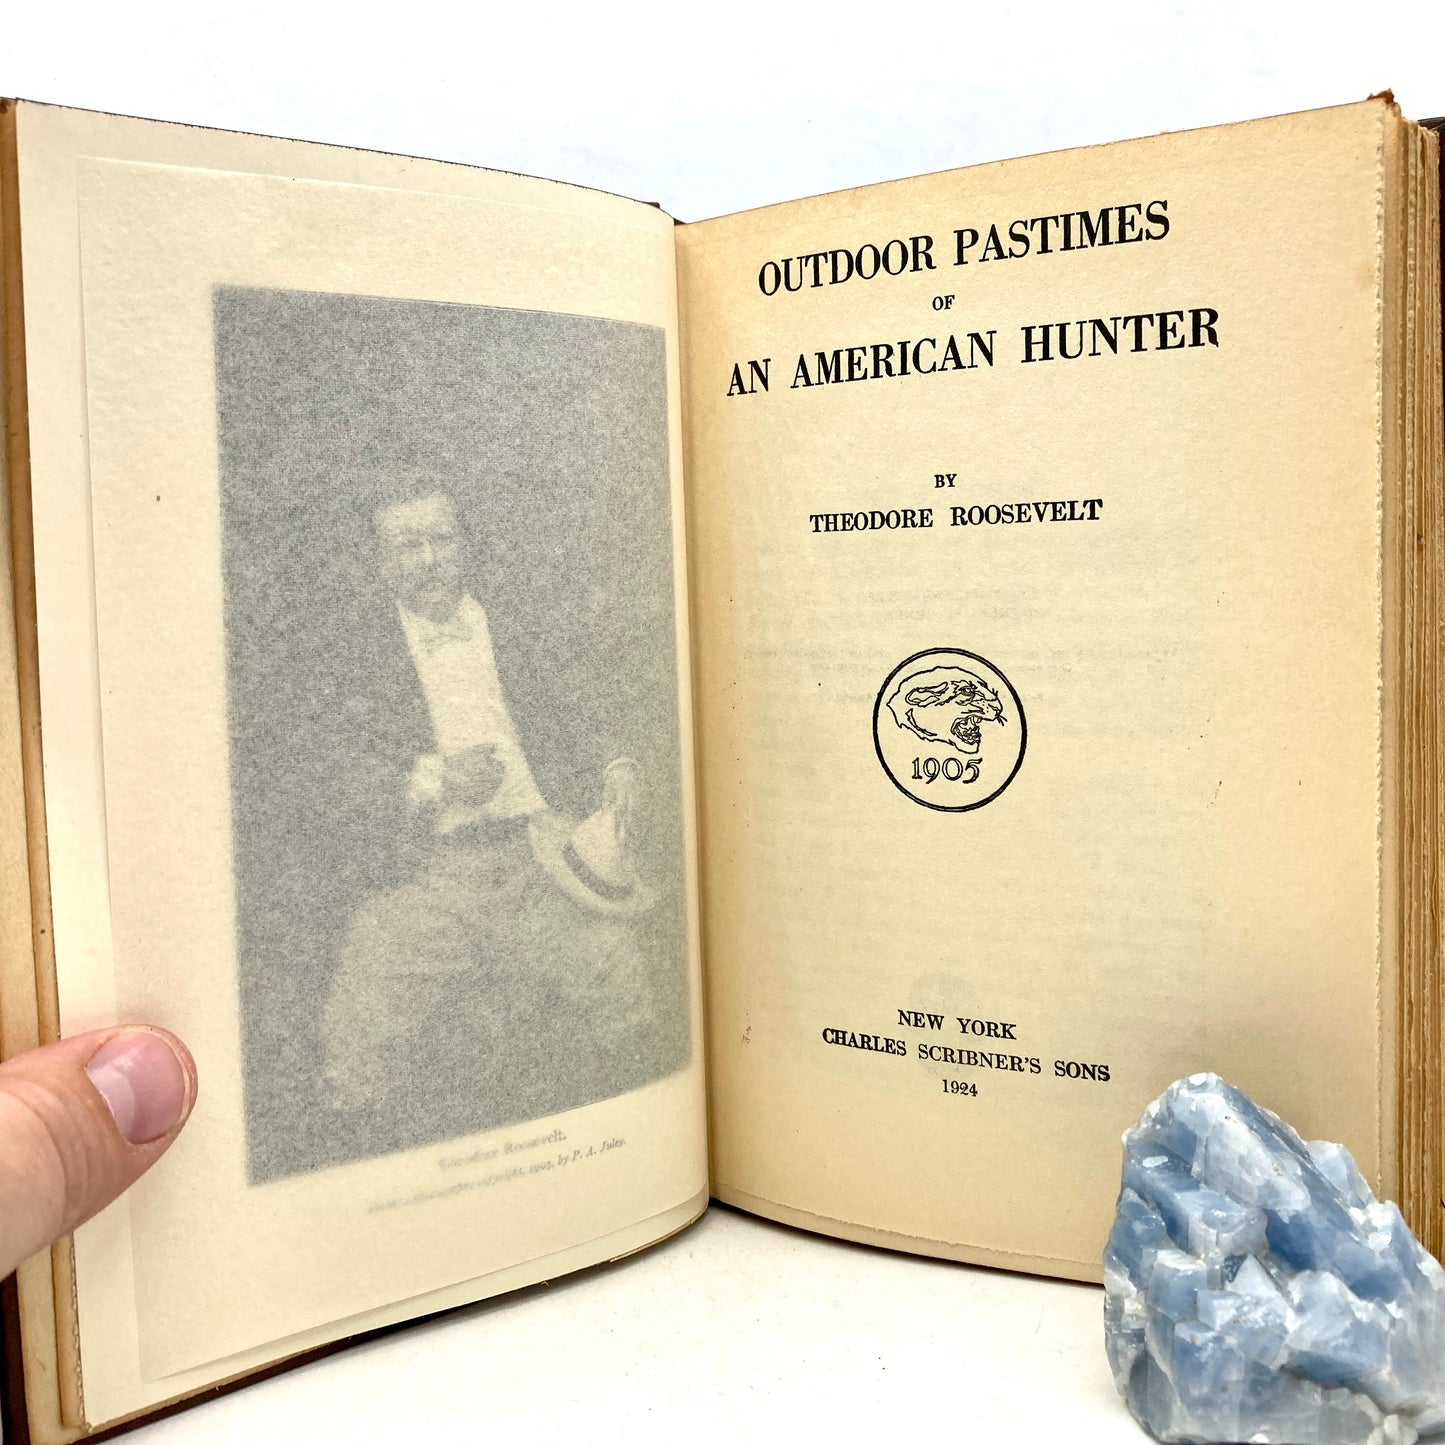 ROOSEVELT, Theodore "Outdoor Pastimes of an American Hunter" [Scribners, 1924]